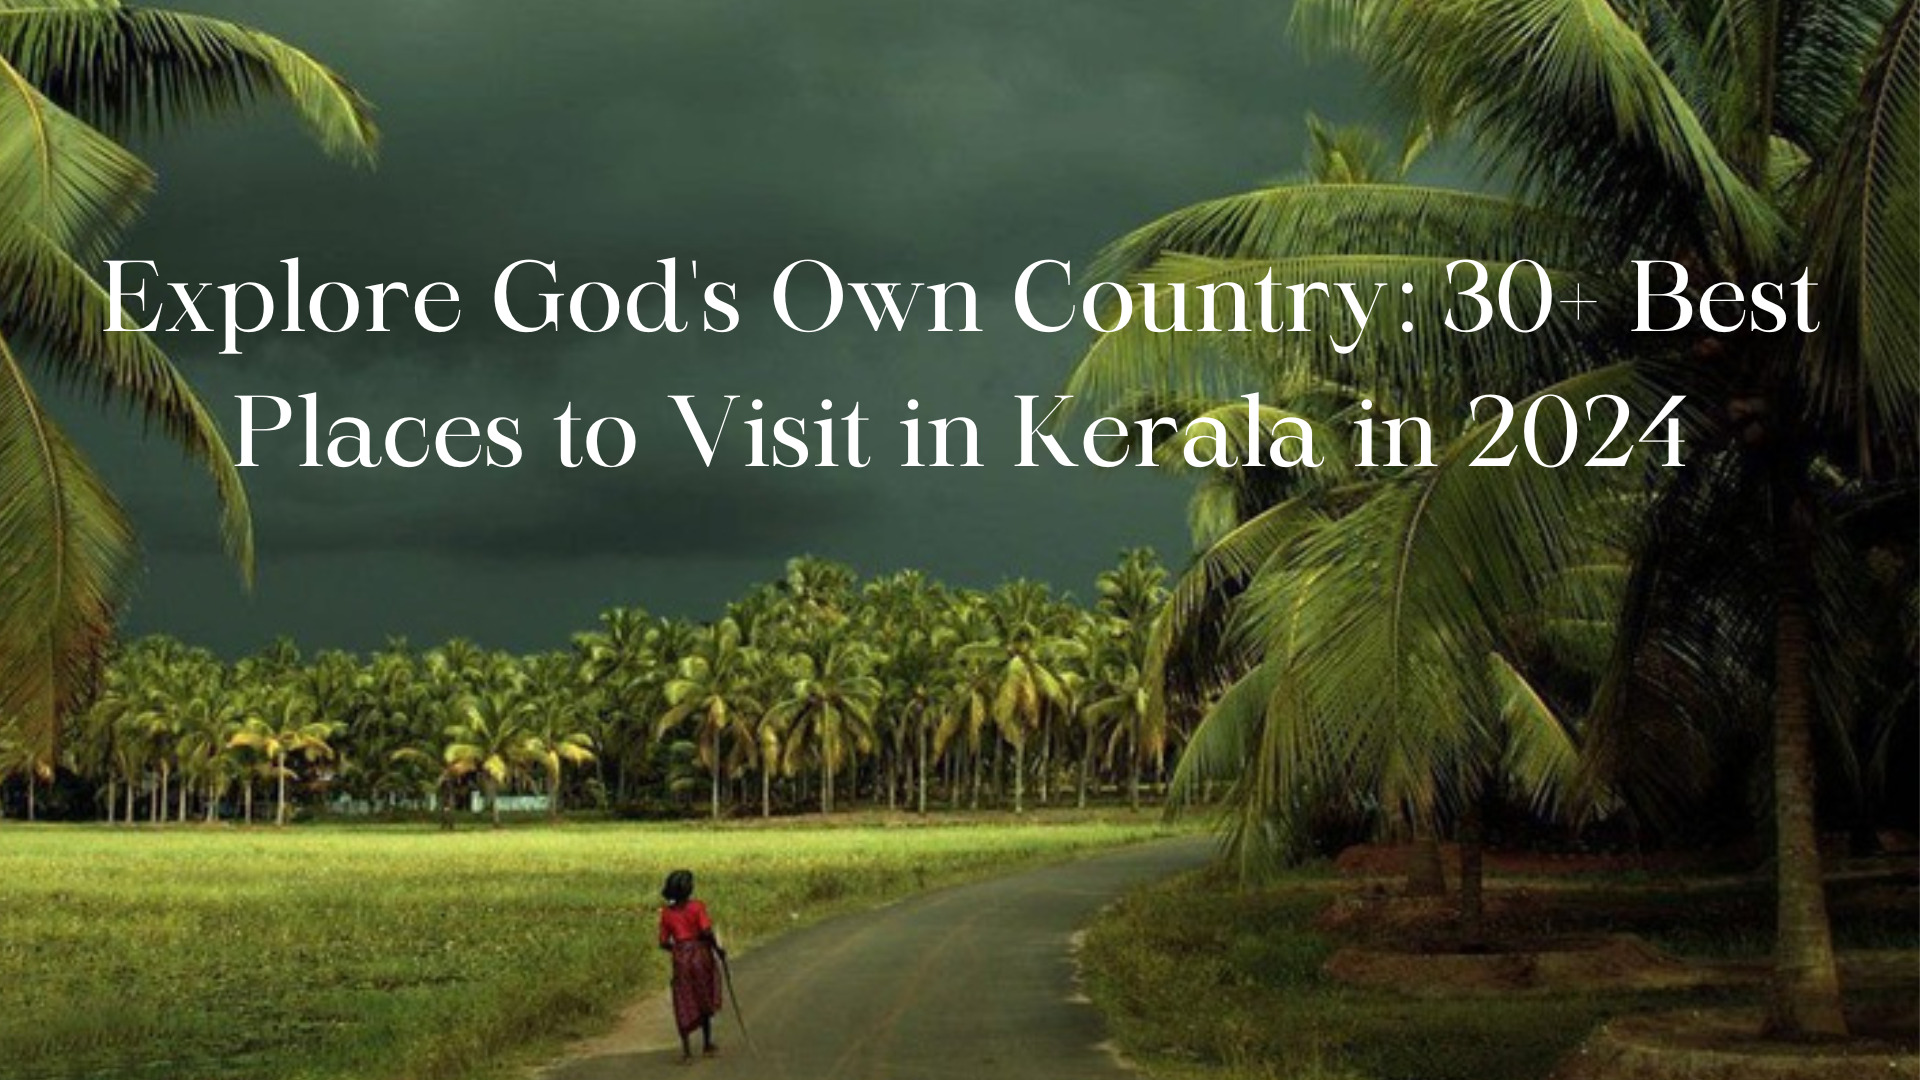 Explore God’s Own Country: 30+ Best Places to Visit in Kerala in 2024